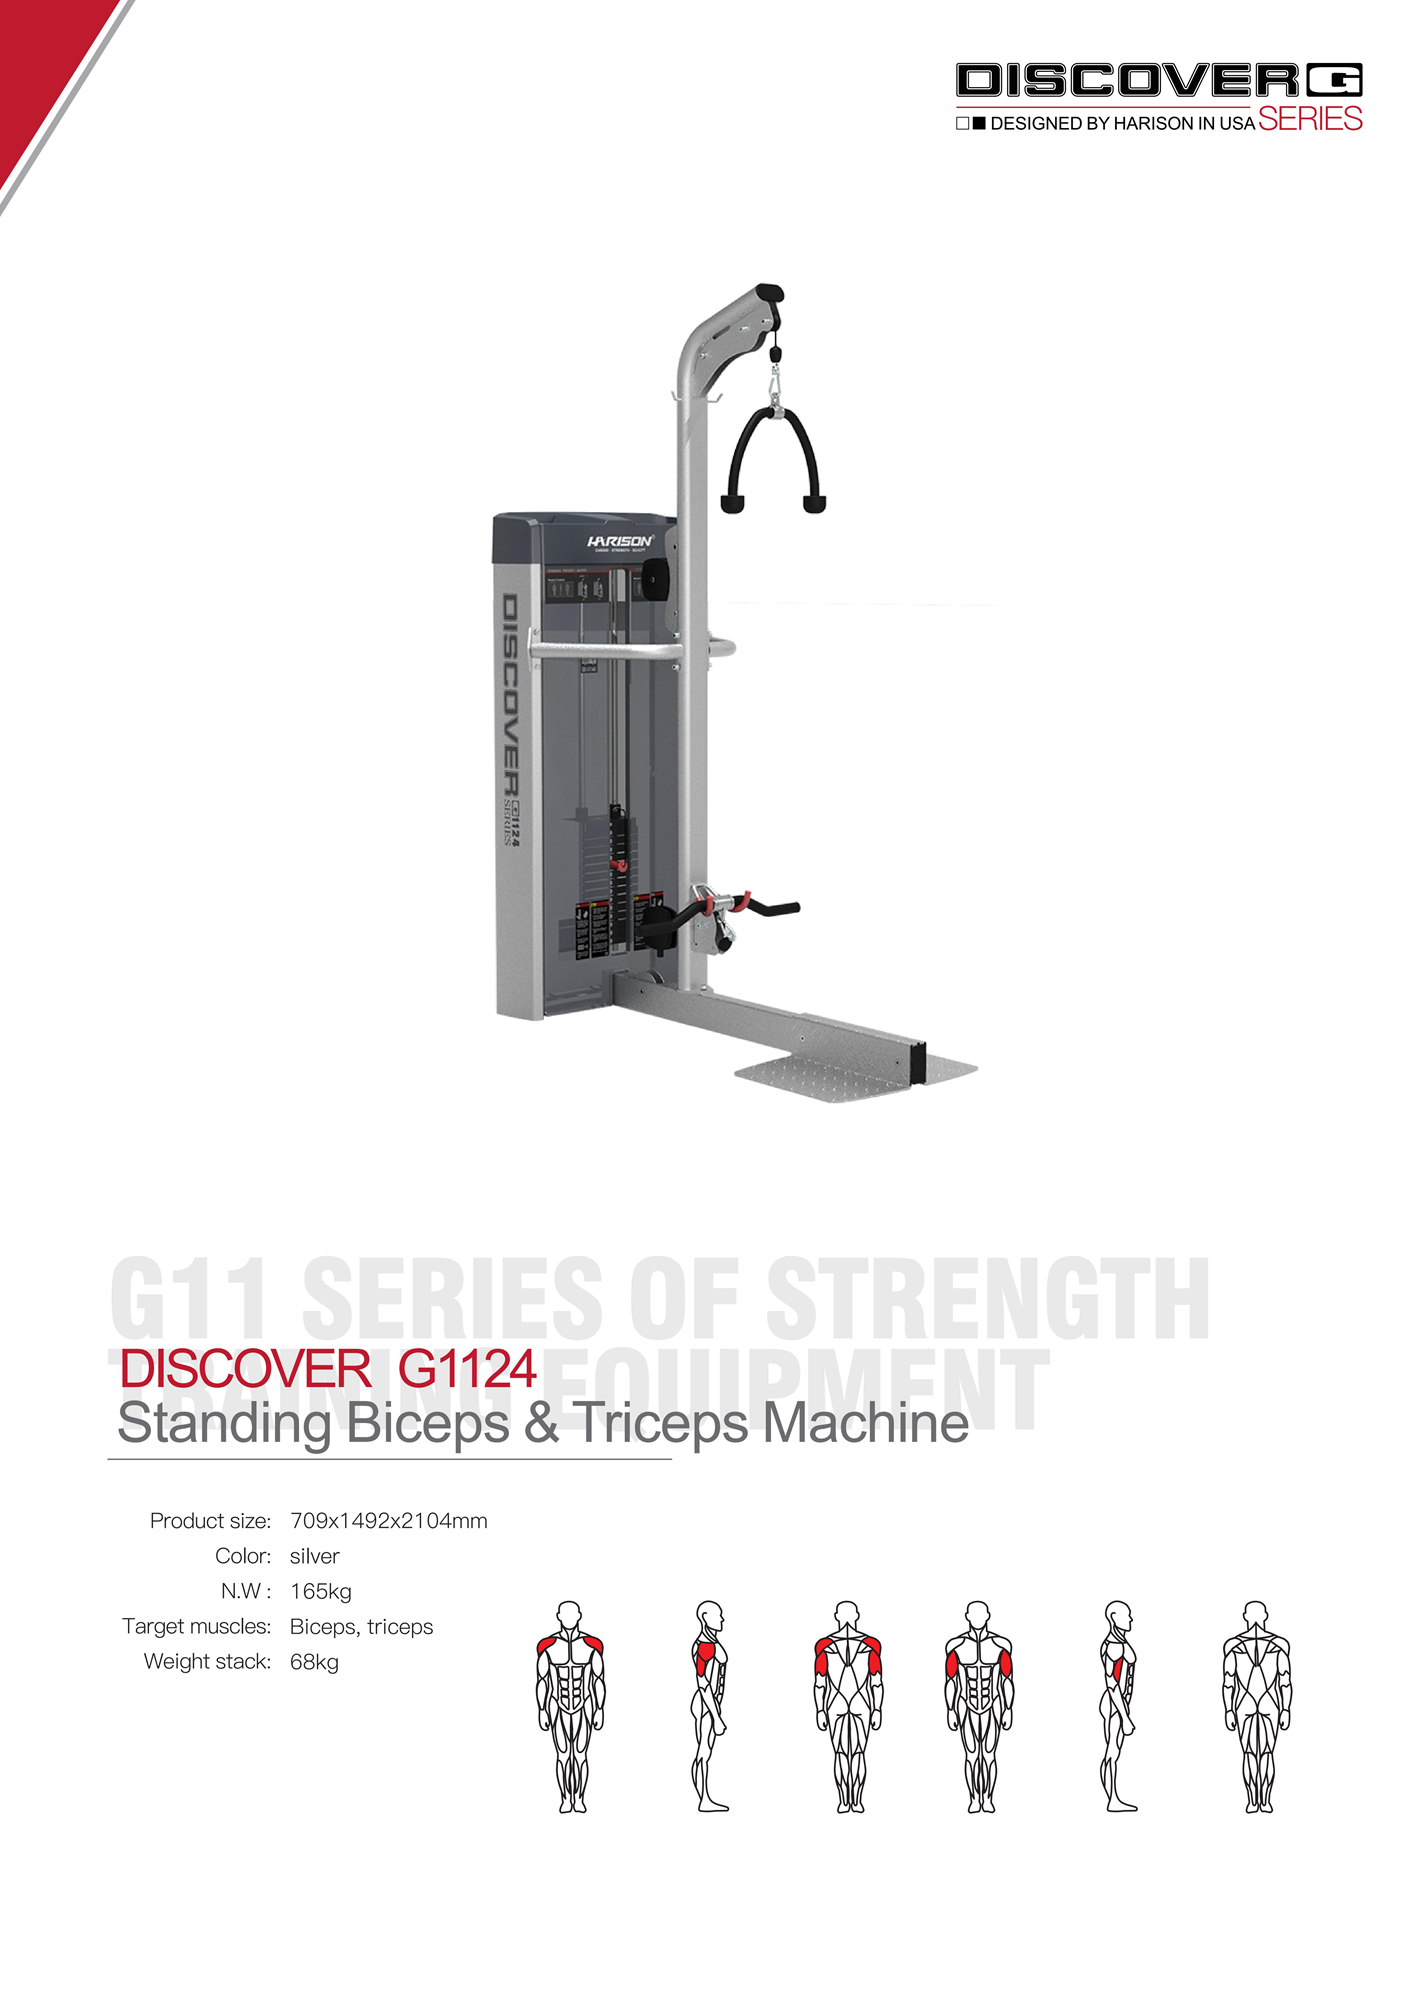 DISCOVER G1124 Standing Biceps & Triceps Machine